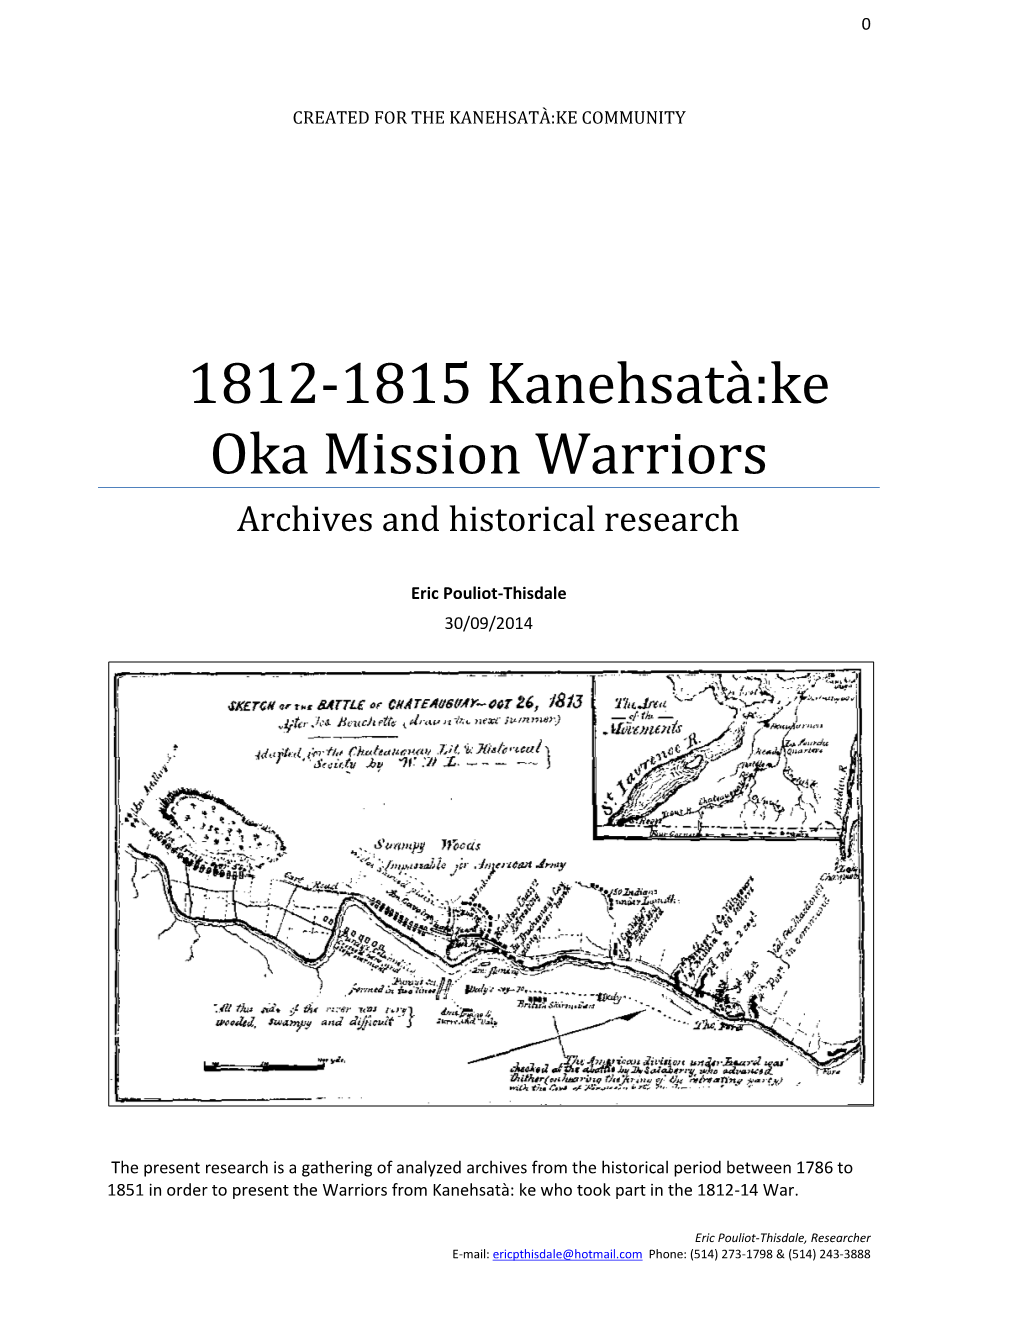 1812-1815 Kanehsatà:Ke Oka Mission Warriors Archives and Historical Research